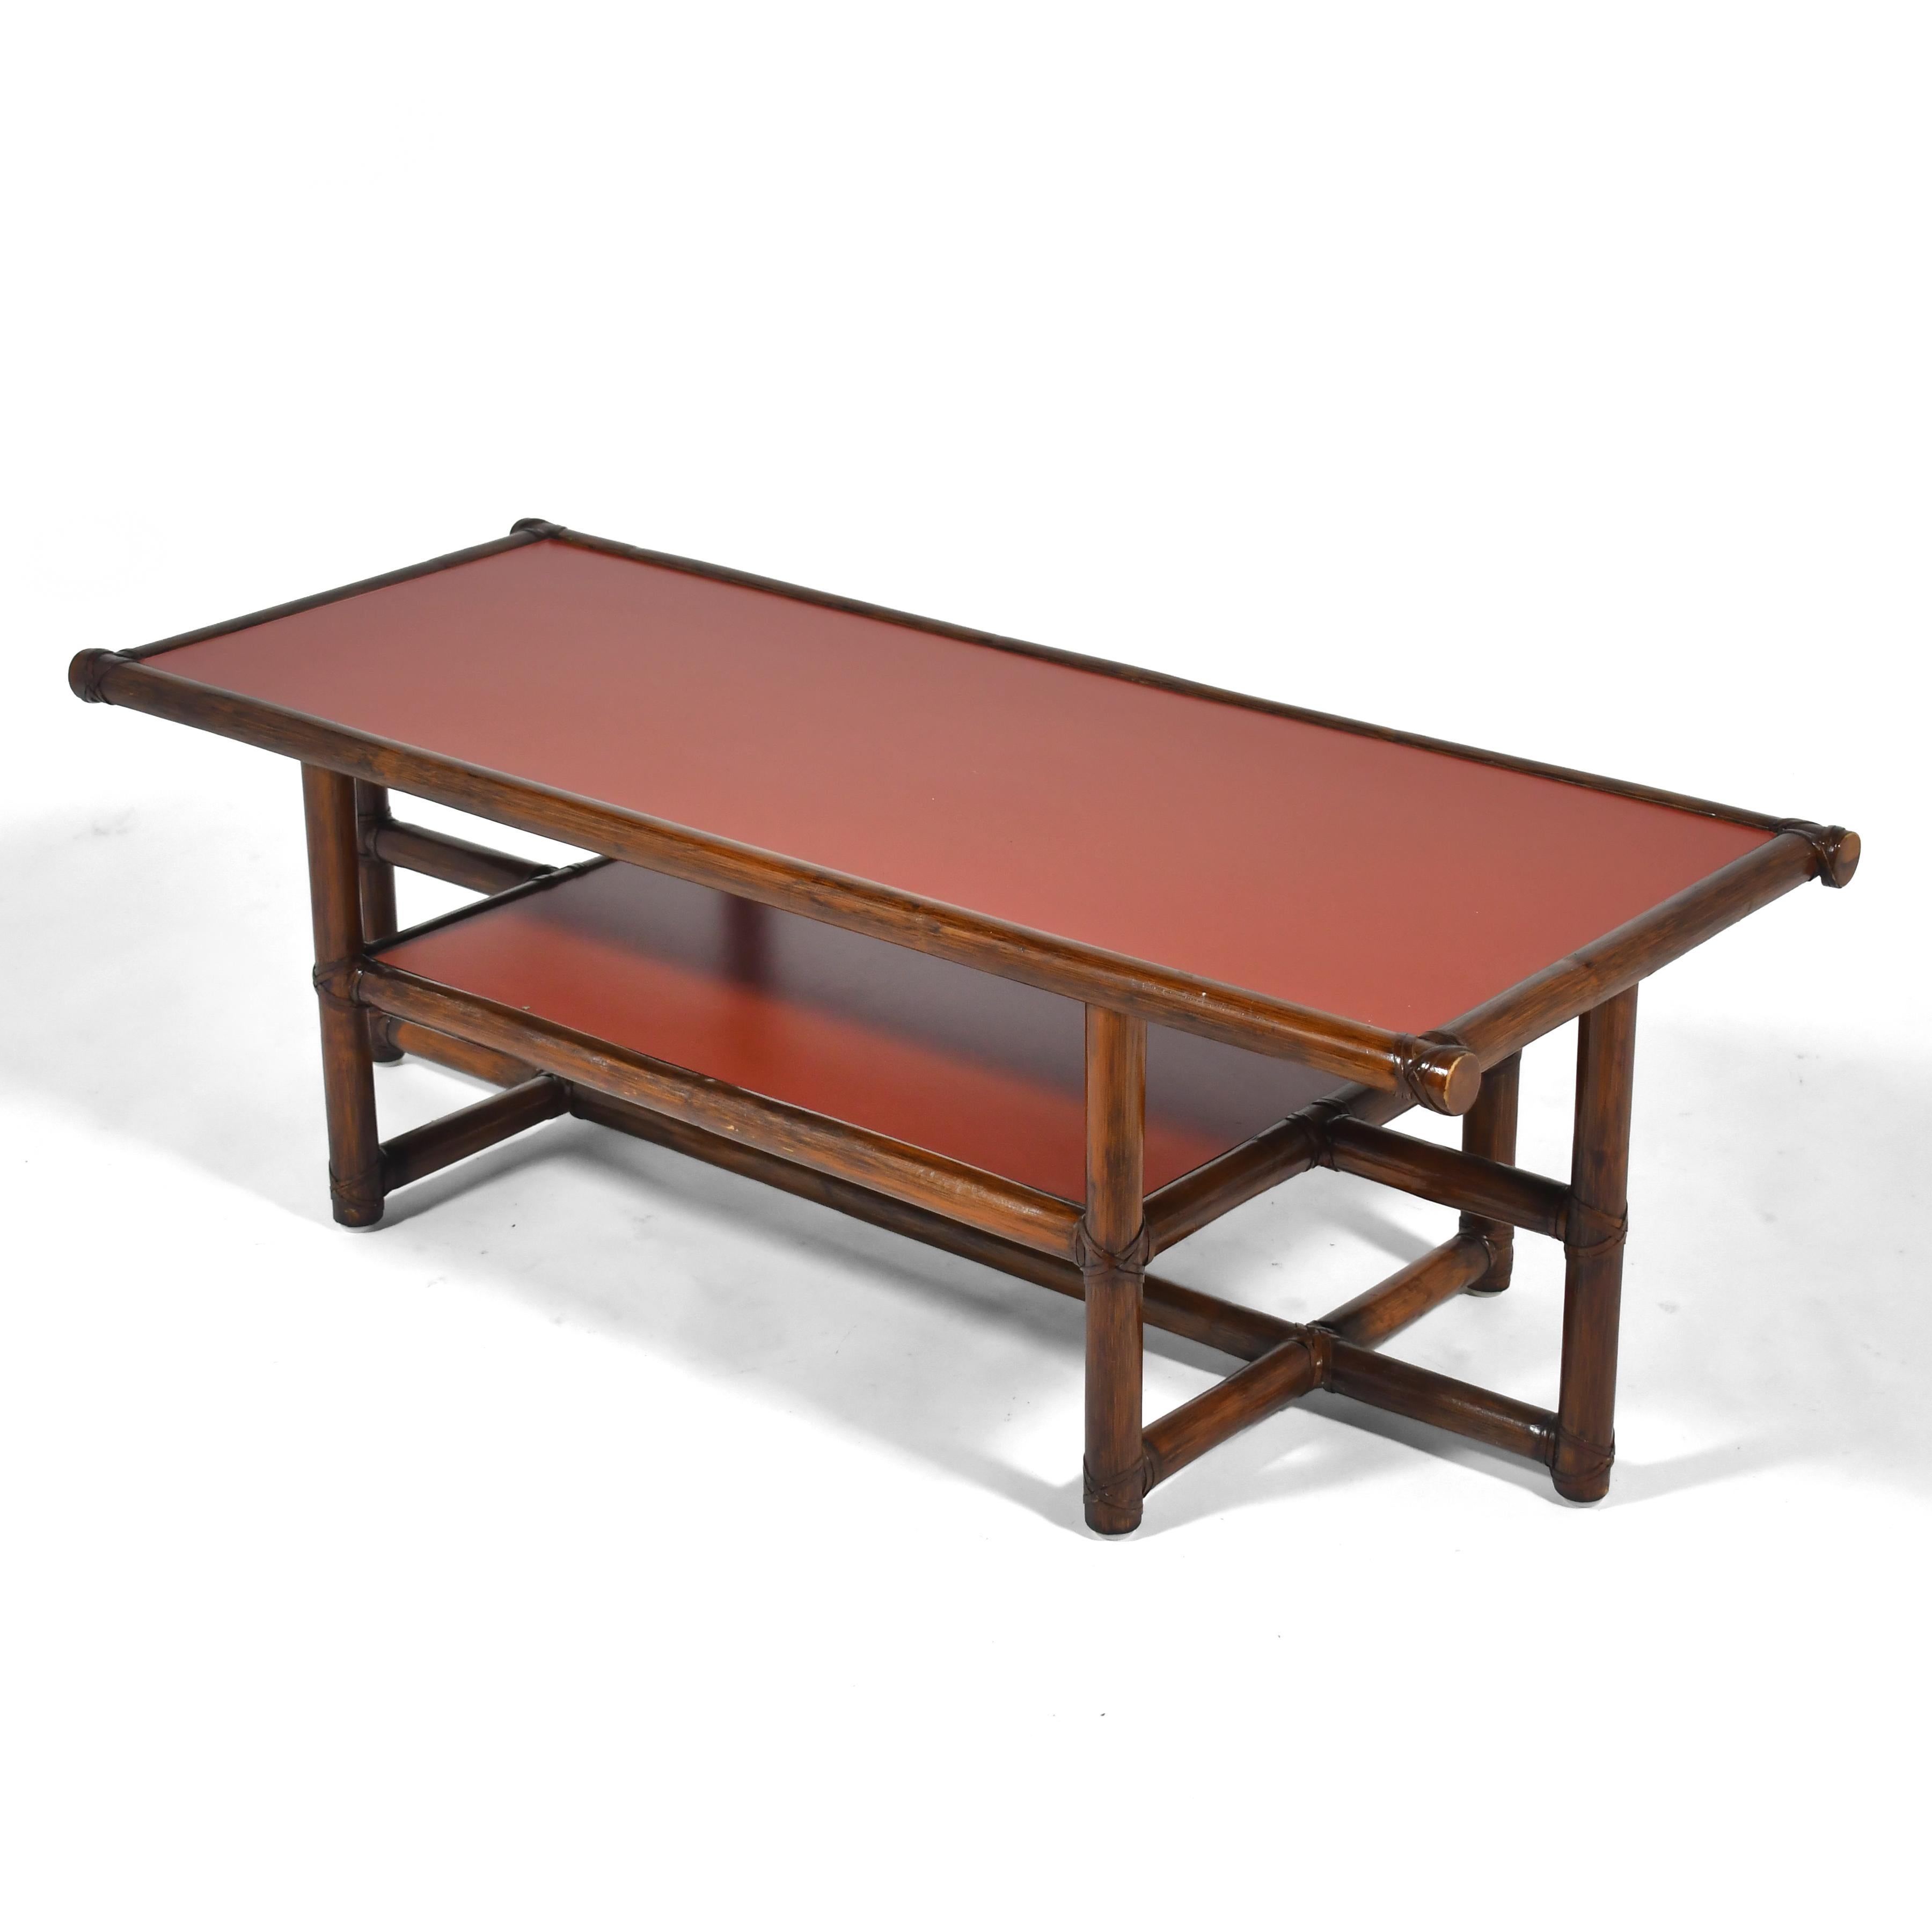 This handsome early design by Elinor McGuire for her company McGuire of San Fransisco has a top and shelf supported by a rattan frame joined by McGuire's trademarked rawhide method. The tops are of hard-wearing mica in a beautiful bittersweet